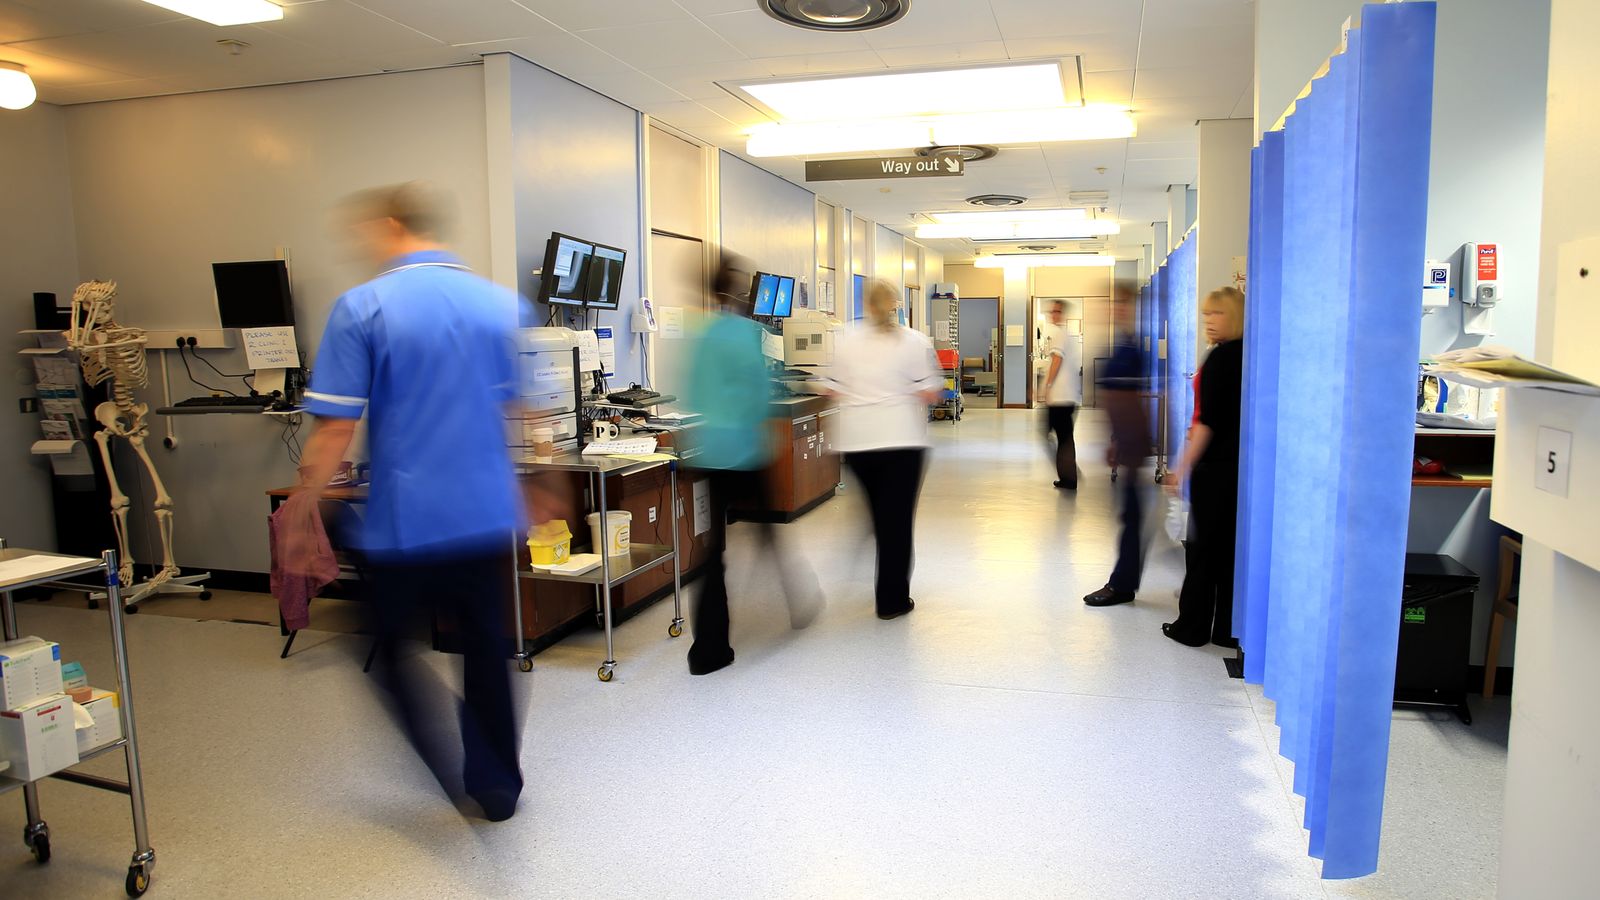 Cost-of-living crisis: Nurses leaving for better-paid jobs in shops because 'they can't afford to work for NHS'